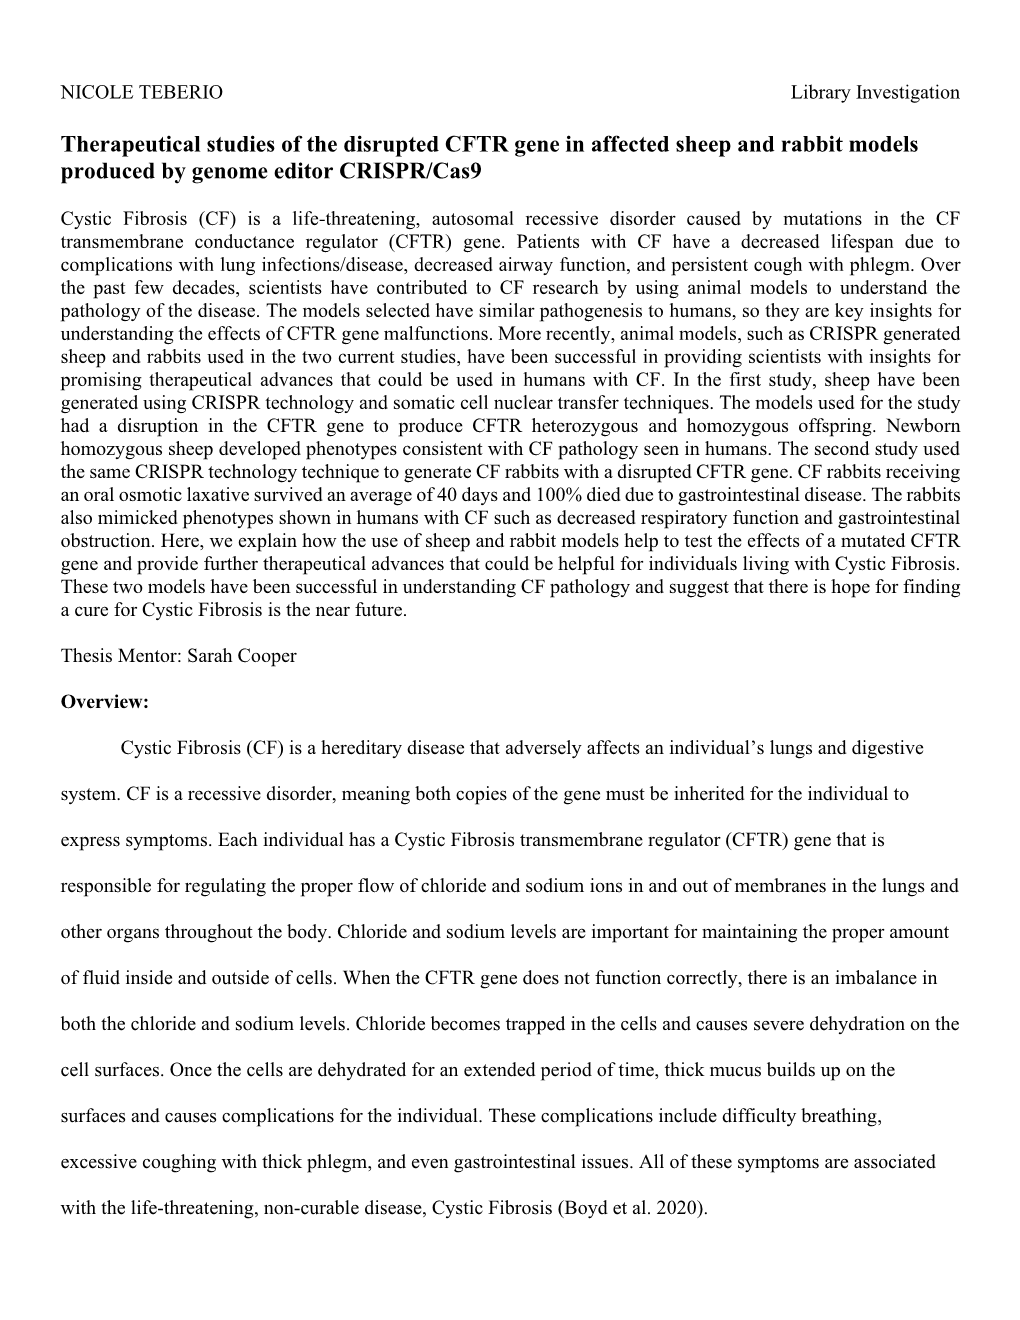 Therapeutical Studies of the Disrupted CFTR Gene in Affected Sheep and Rabbit Models Produced by Genome Editor CRISPR/Cas9